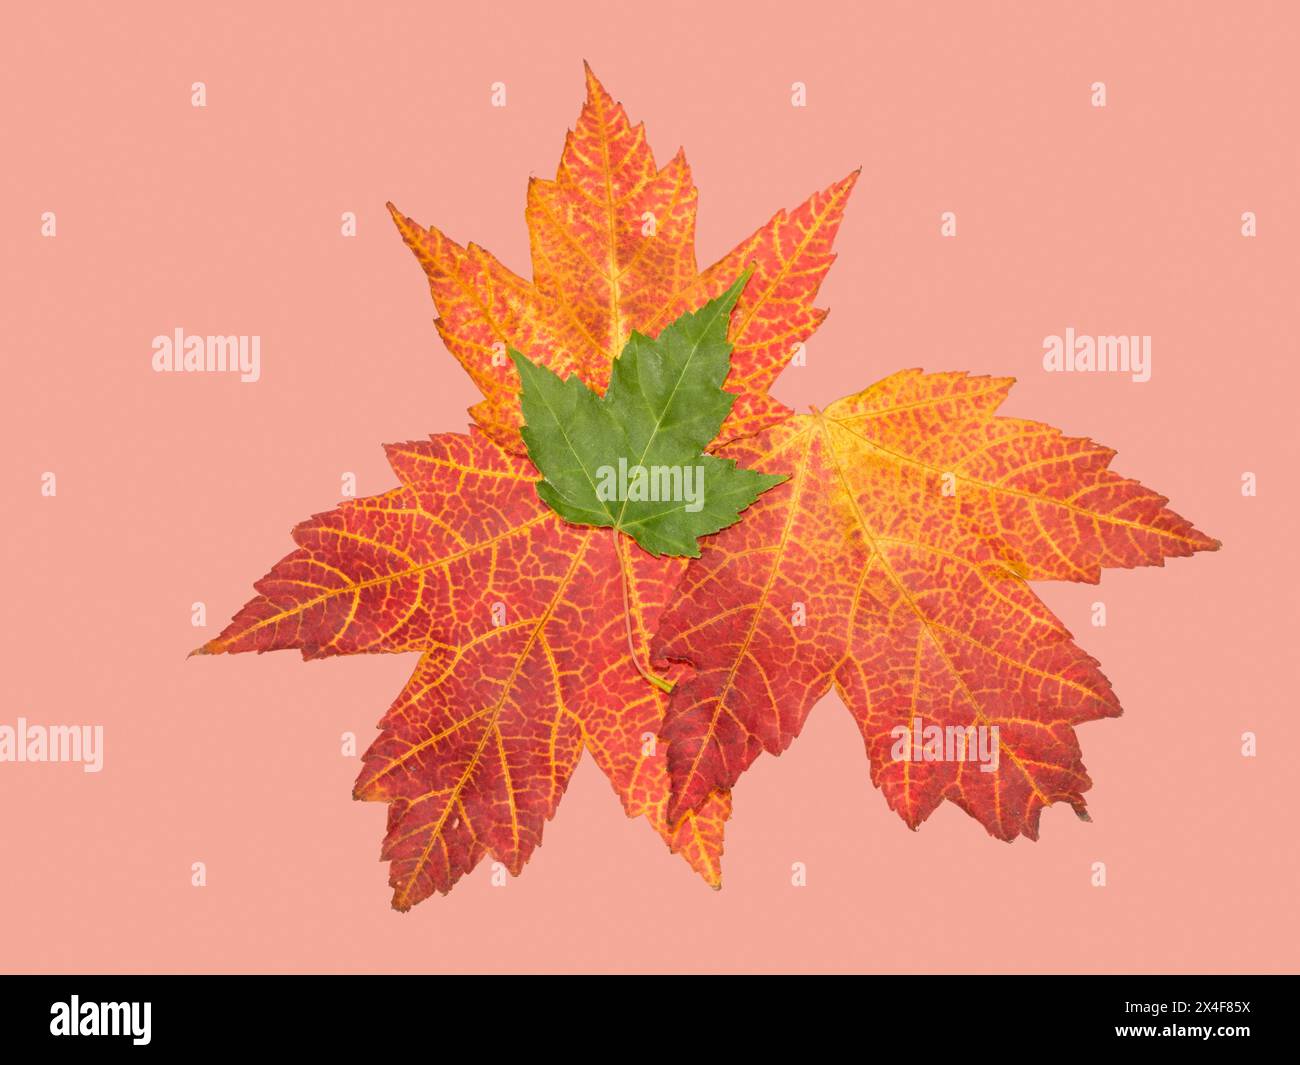 USA, Washington State. Still-life of maple leaves on rose colored background Stock Photo